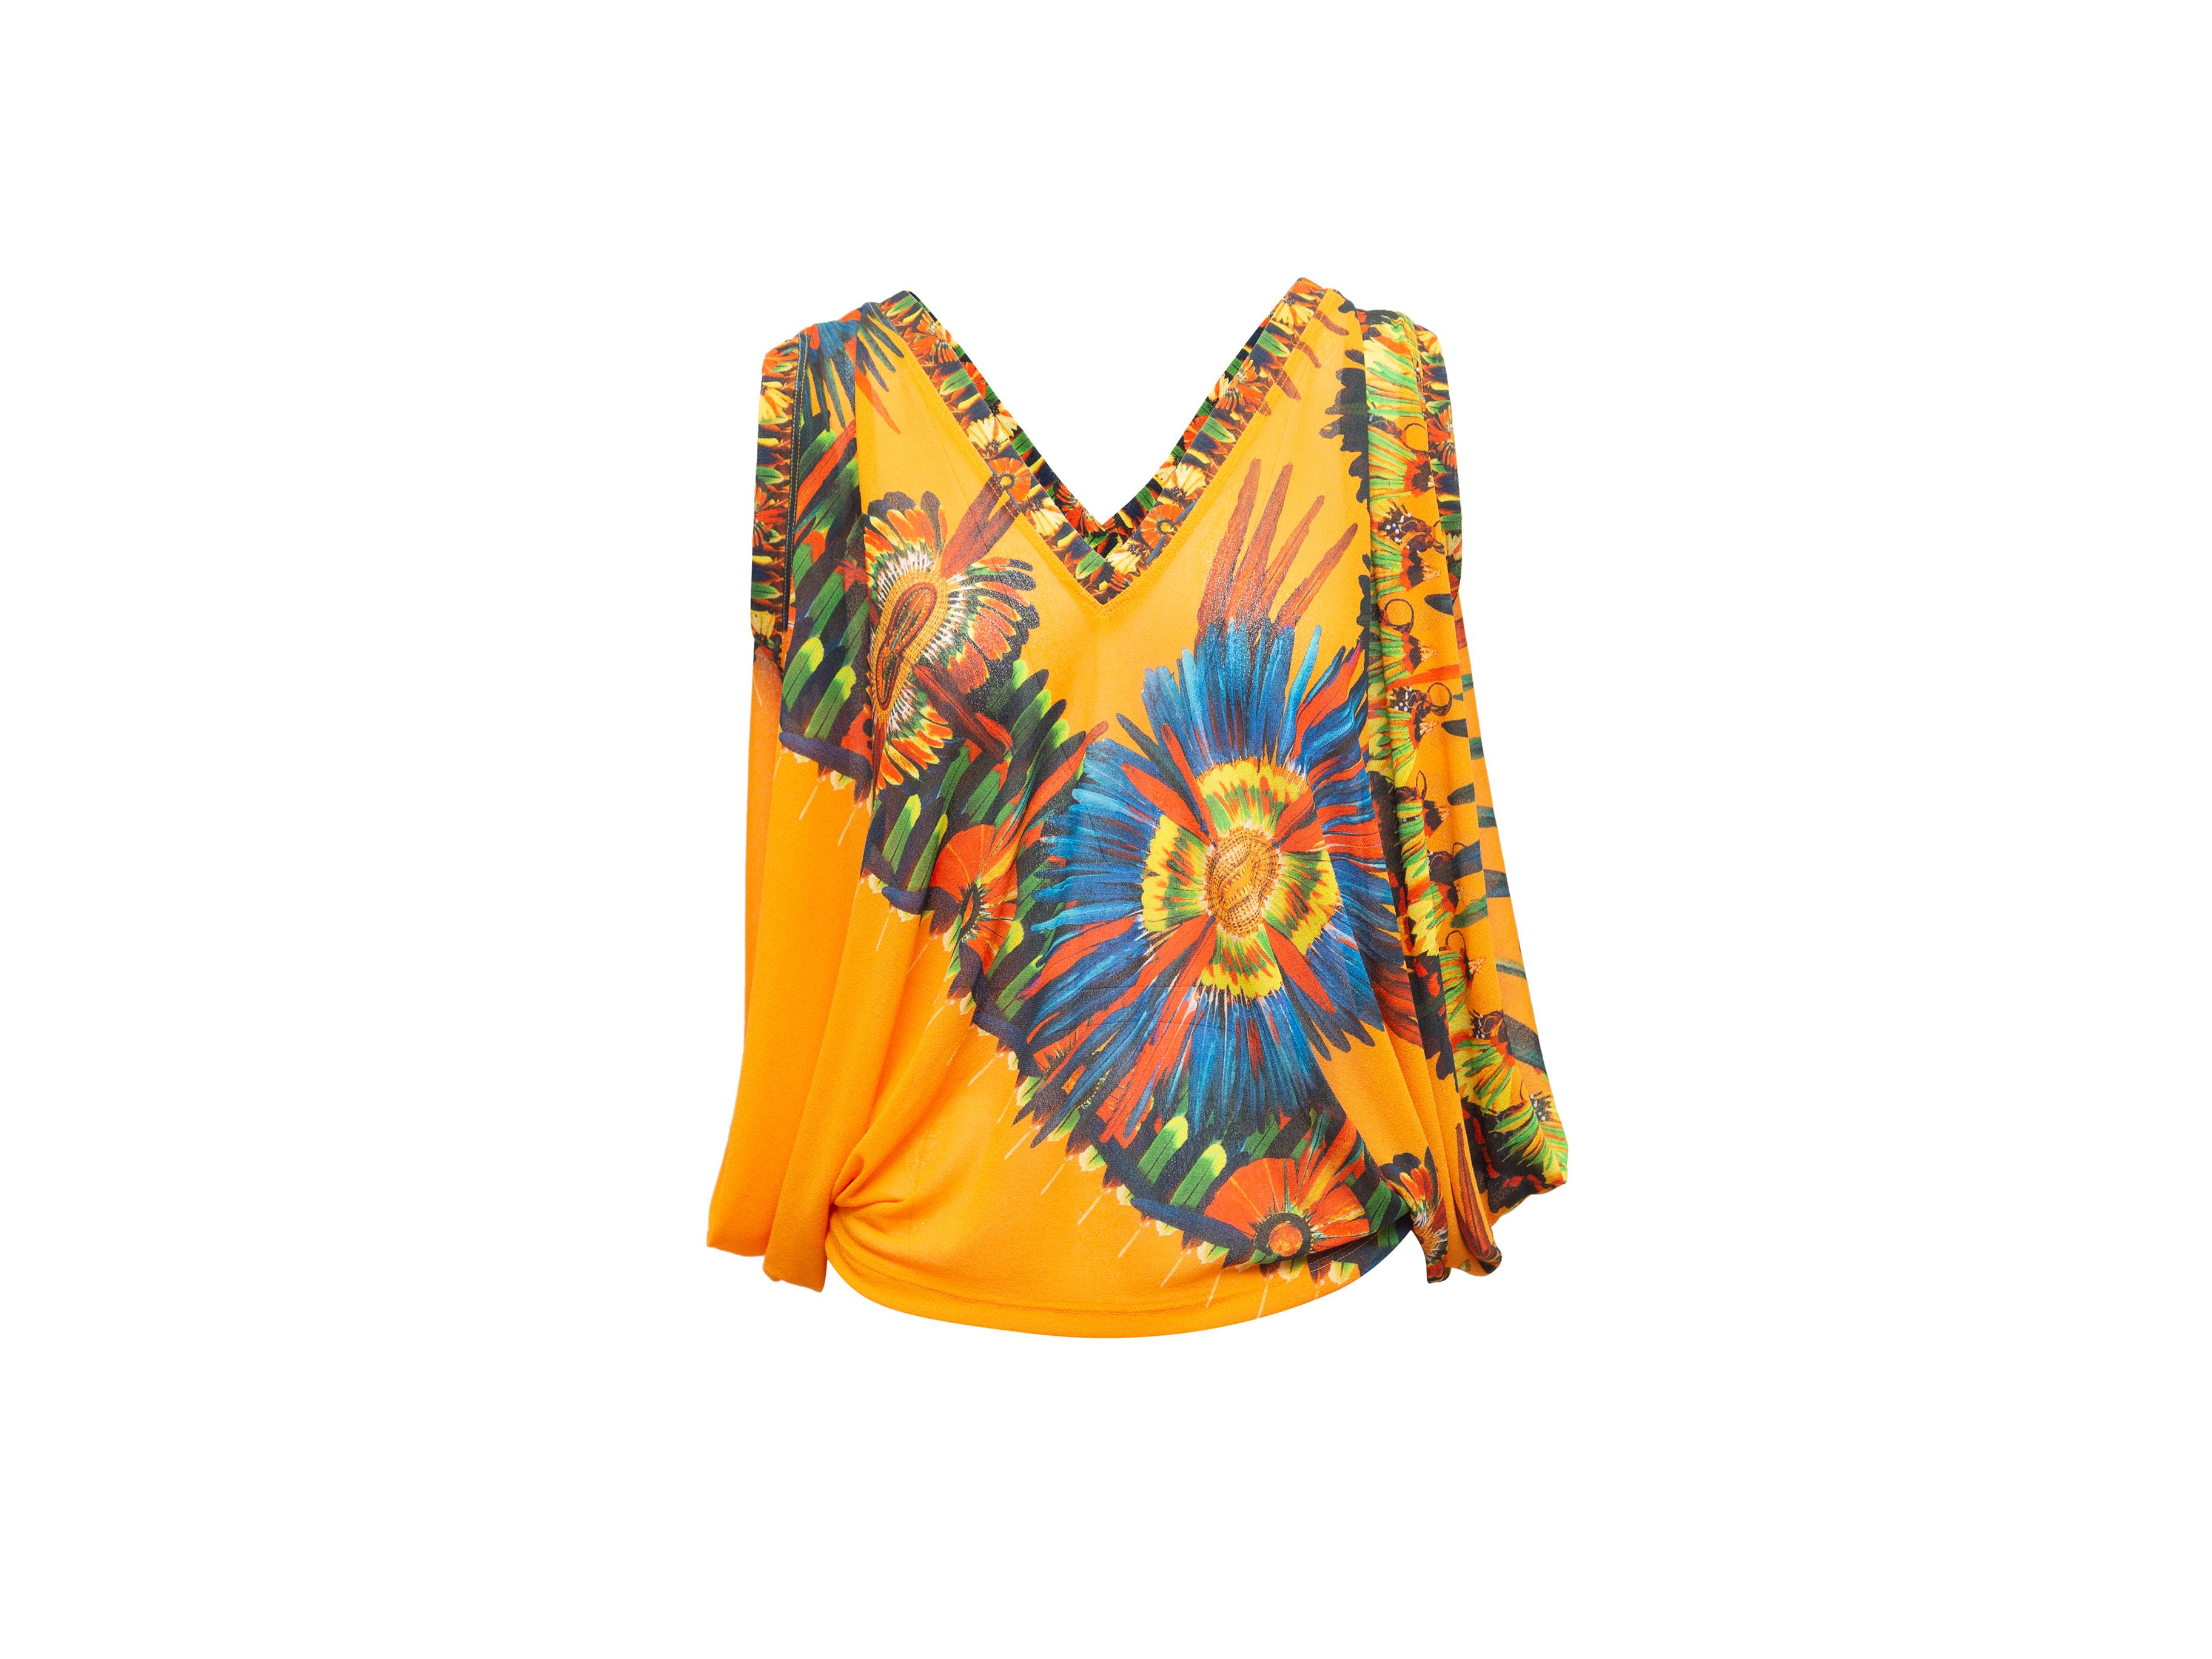 Product details: Orange and multicolor feather print sleeveless top by Jean Paul Gaultier Soleil. V-neck. Draping at sides. 54